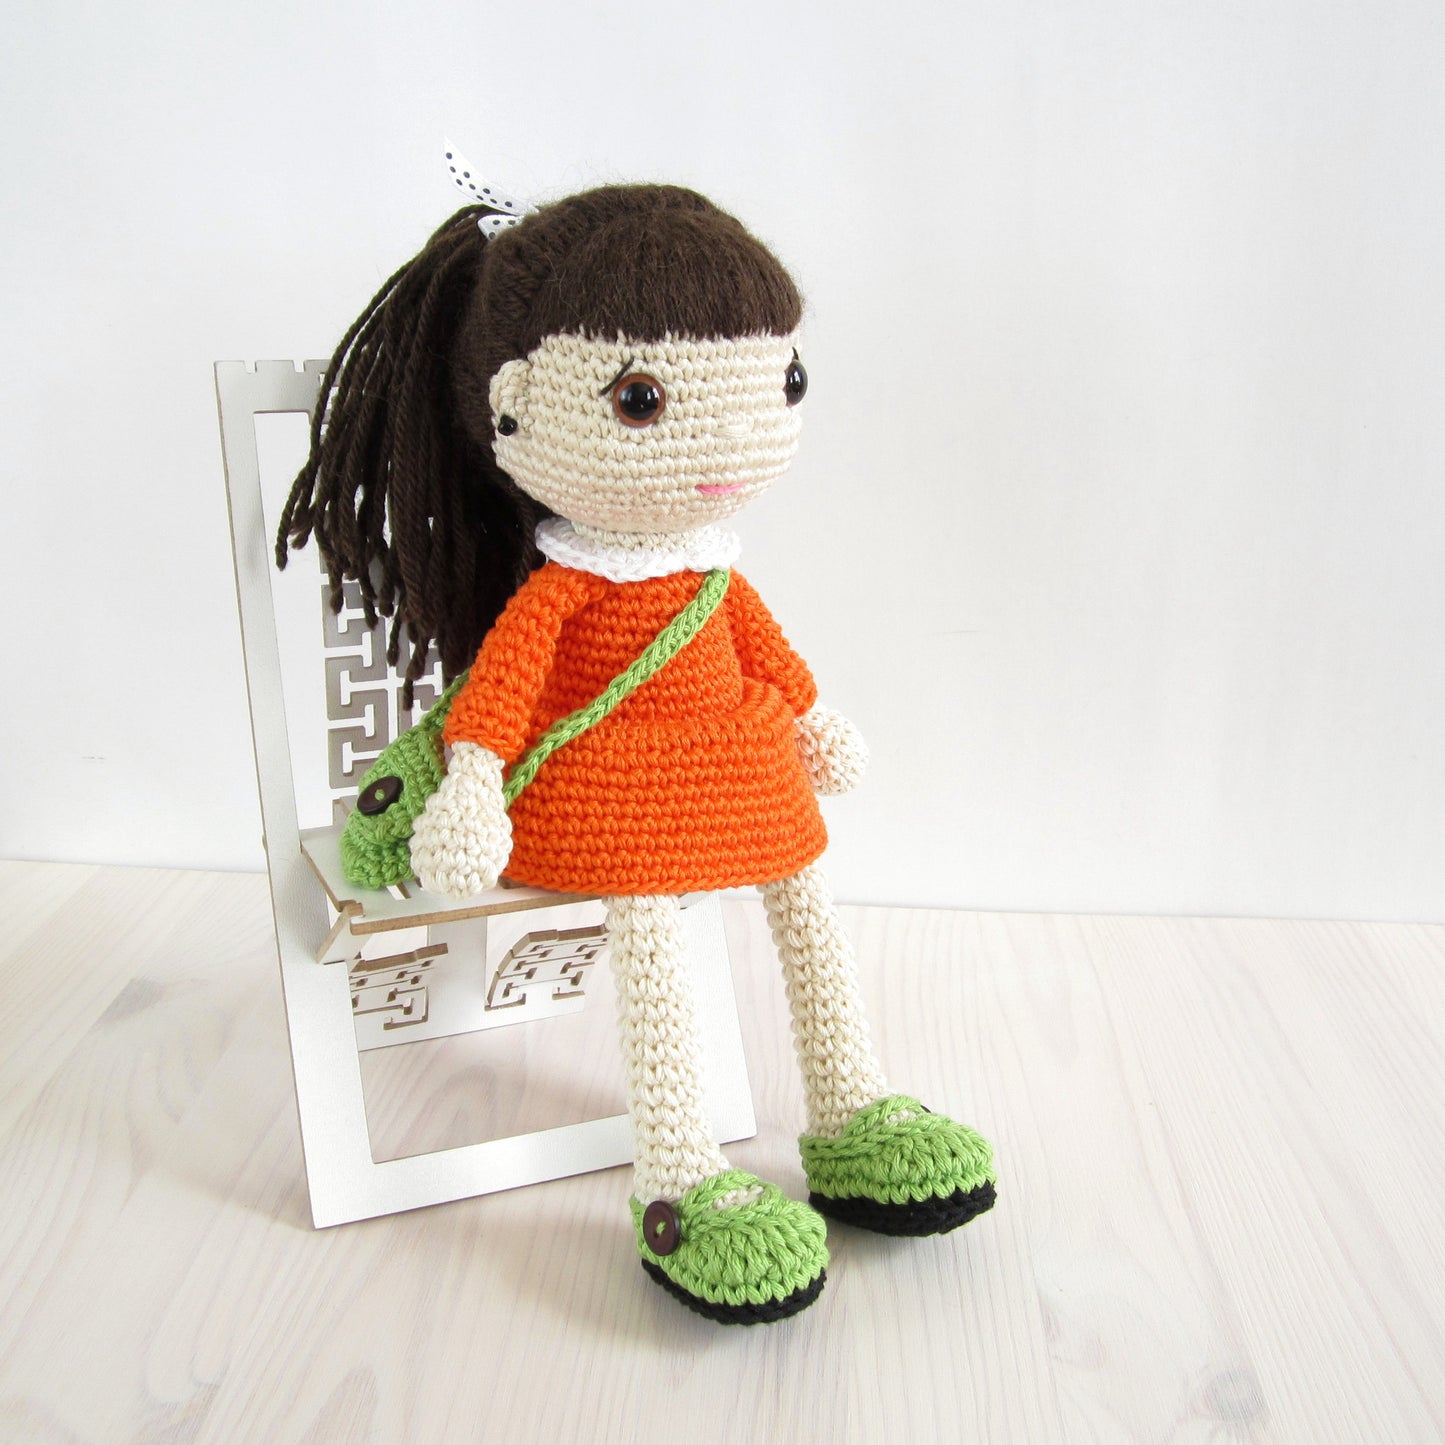 PATTERN: Doll in a Dress with a Messenger Bag